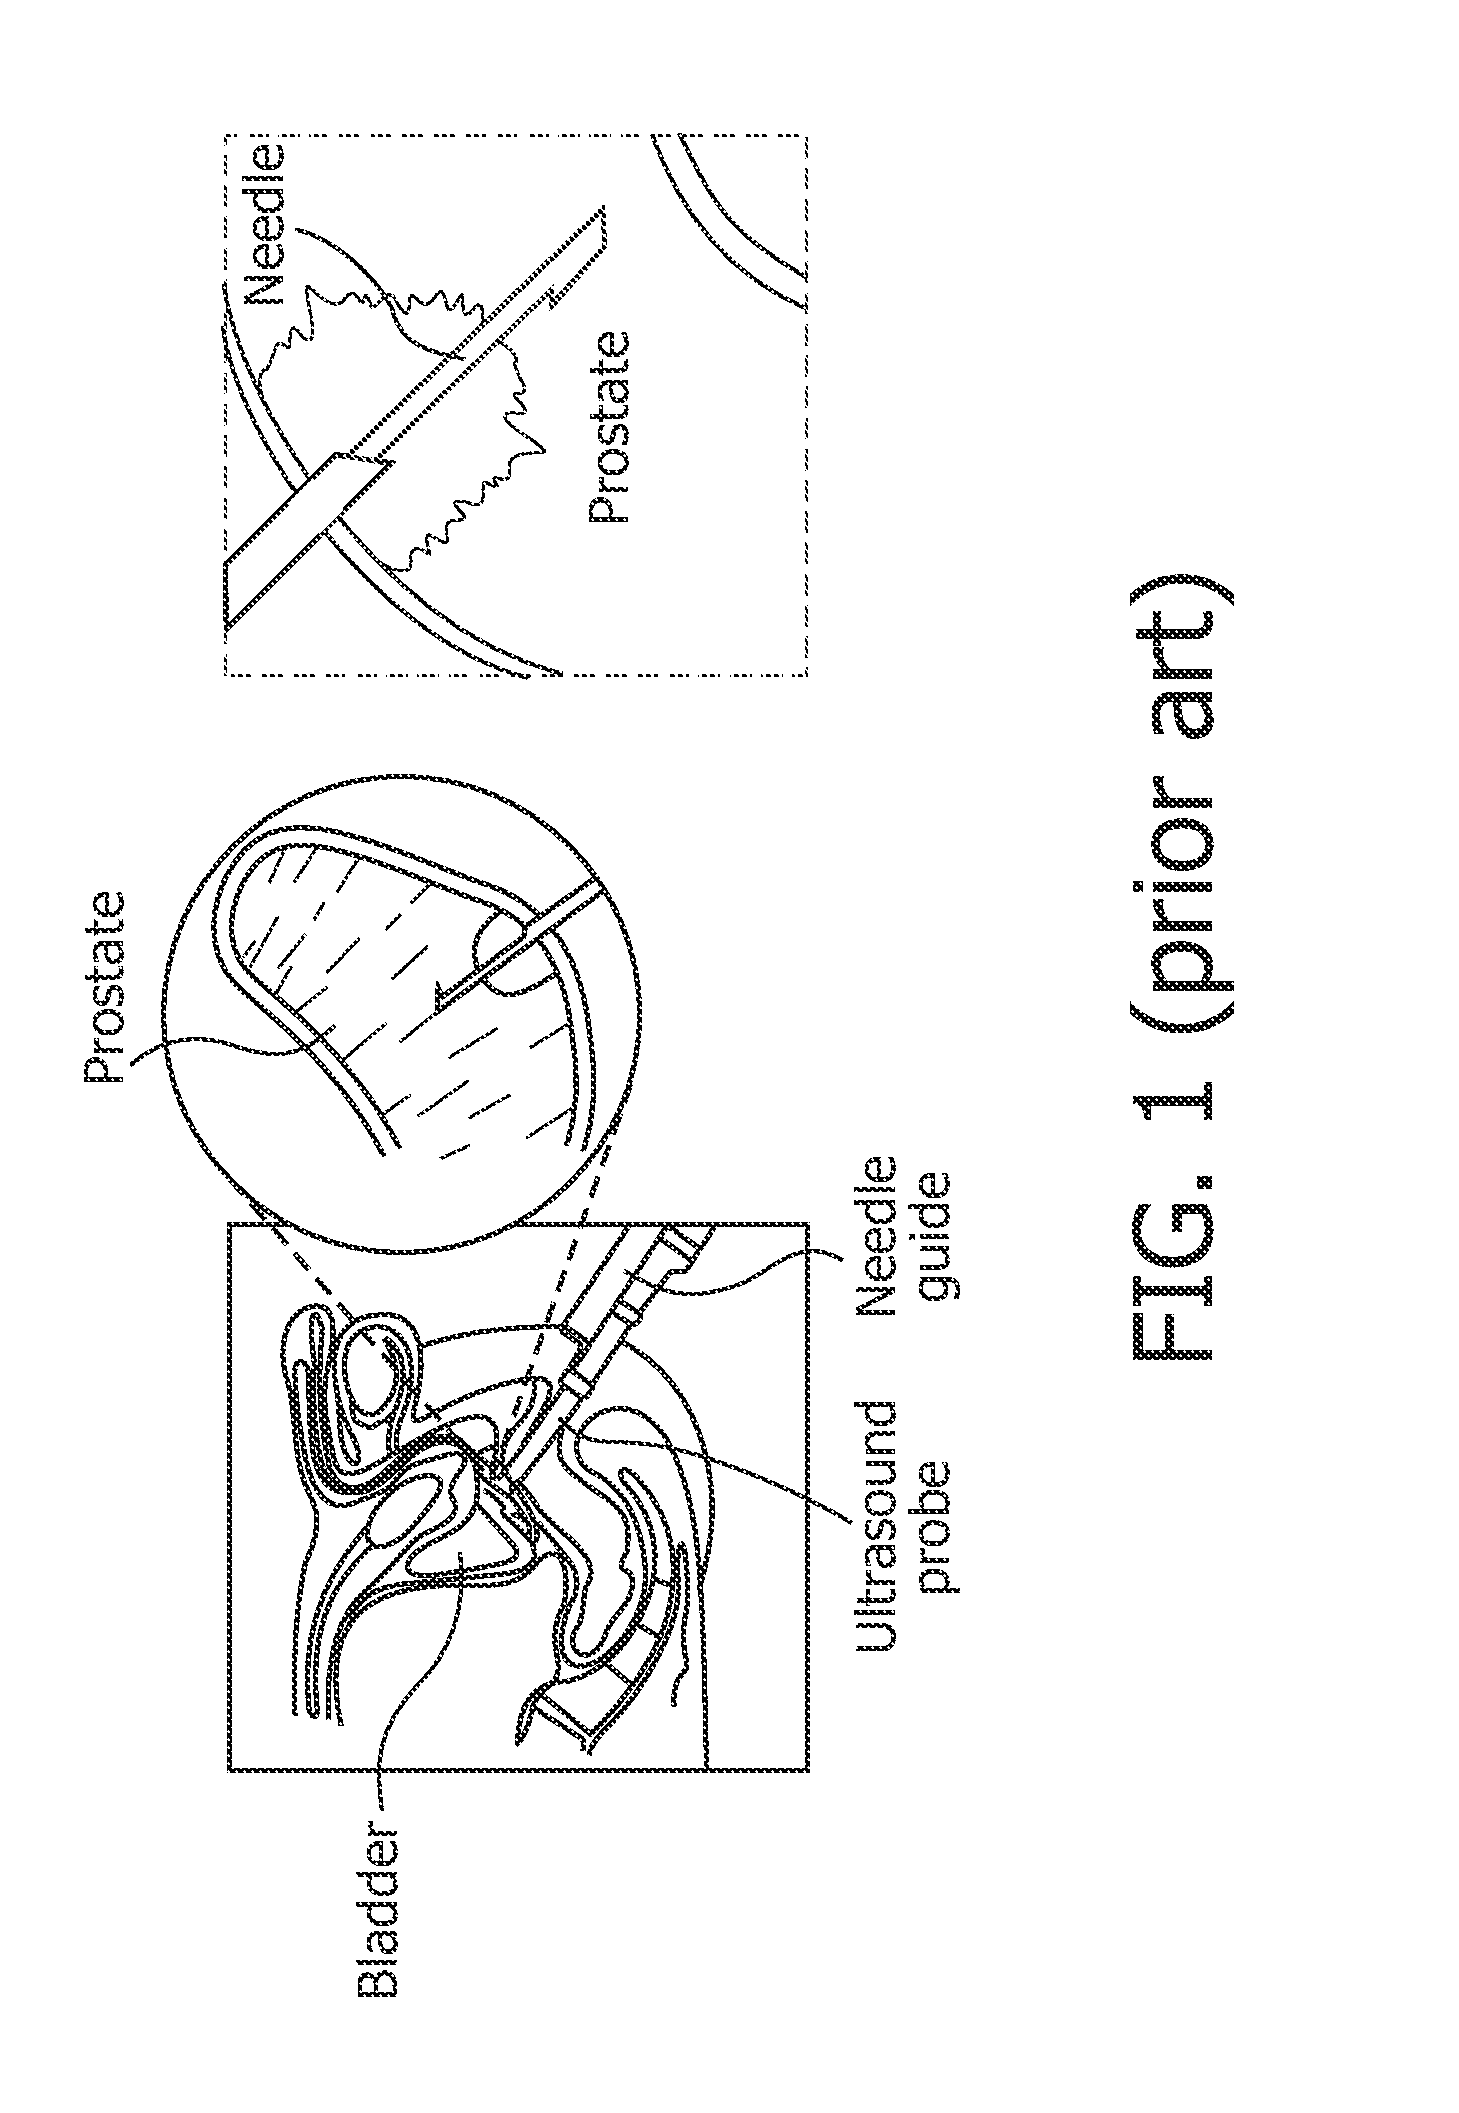 Optical probe having a position measuring system